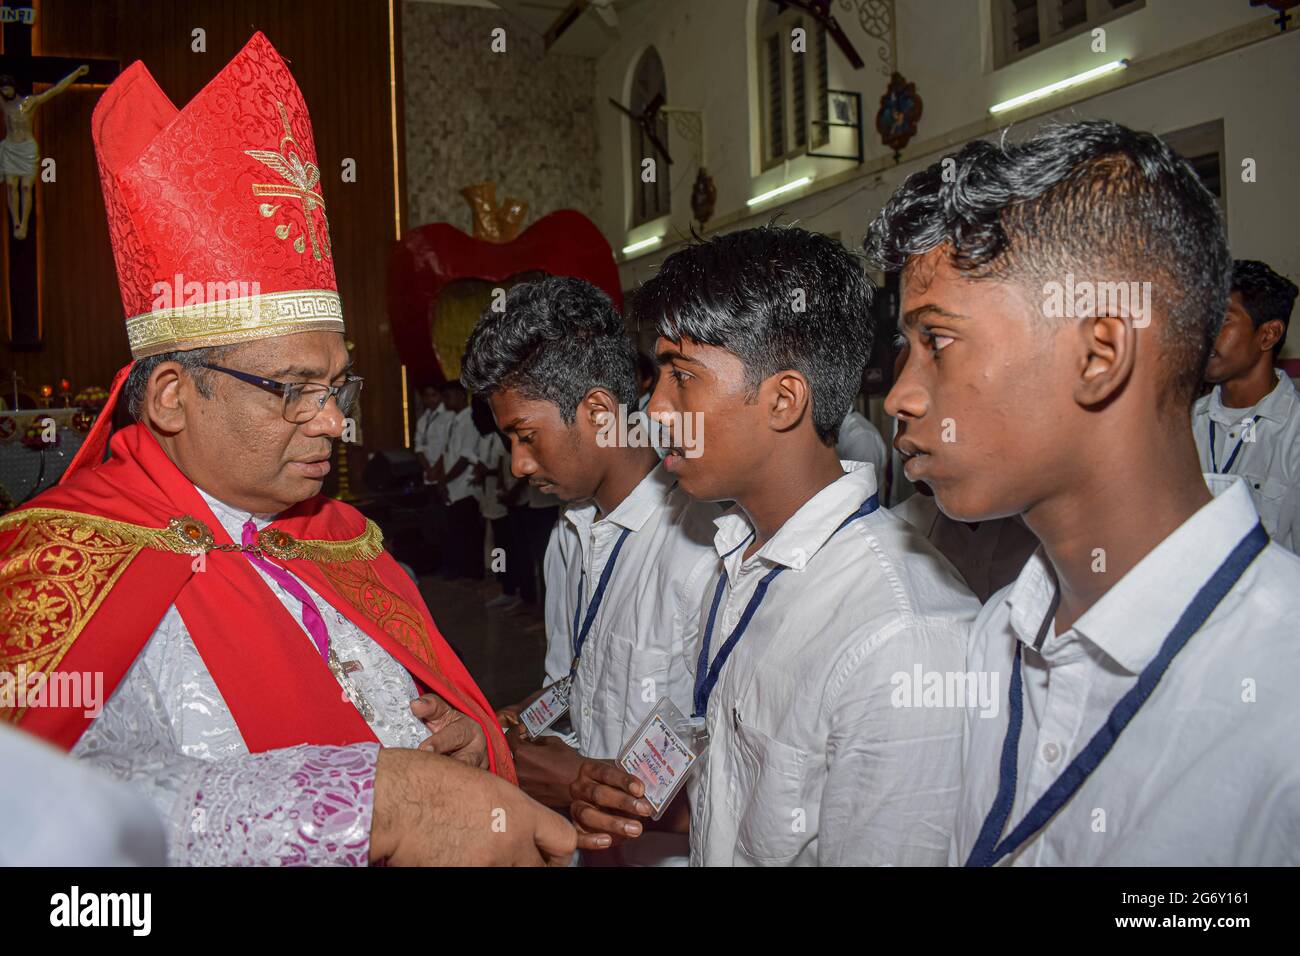 Bishop is giving confirmation sacrament to young teenagers. Stock Photo